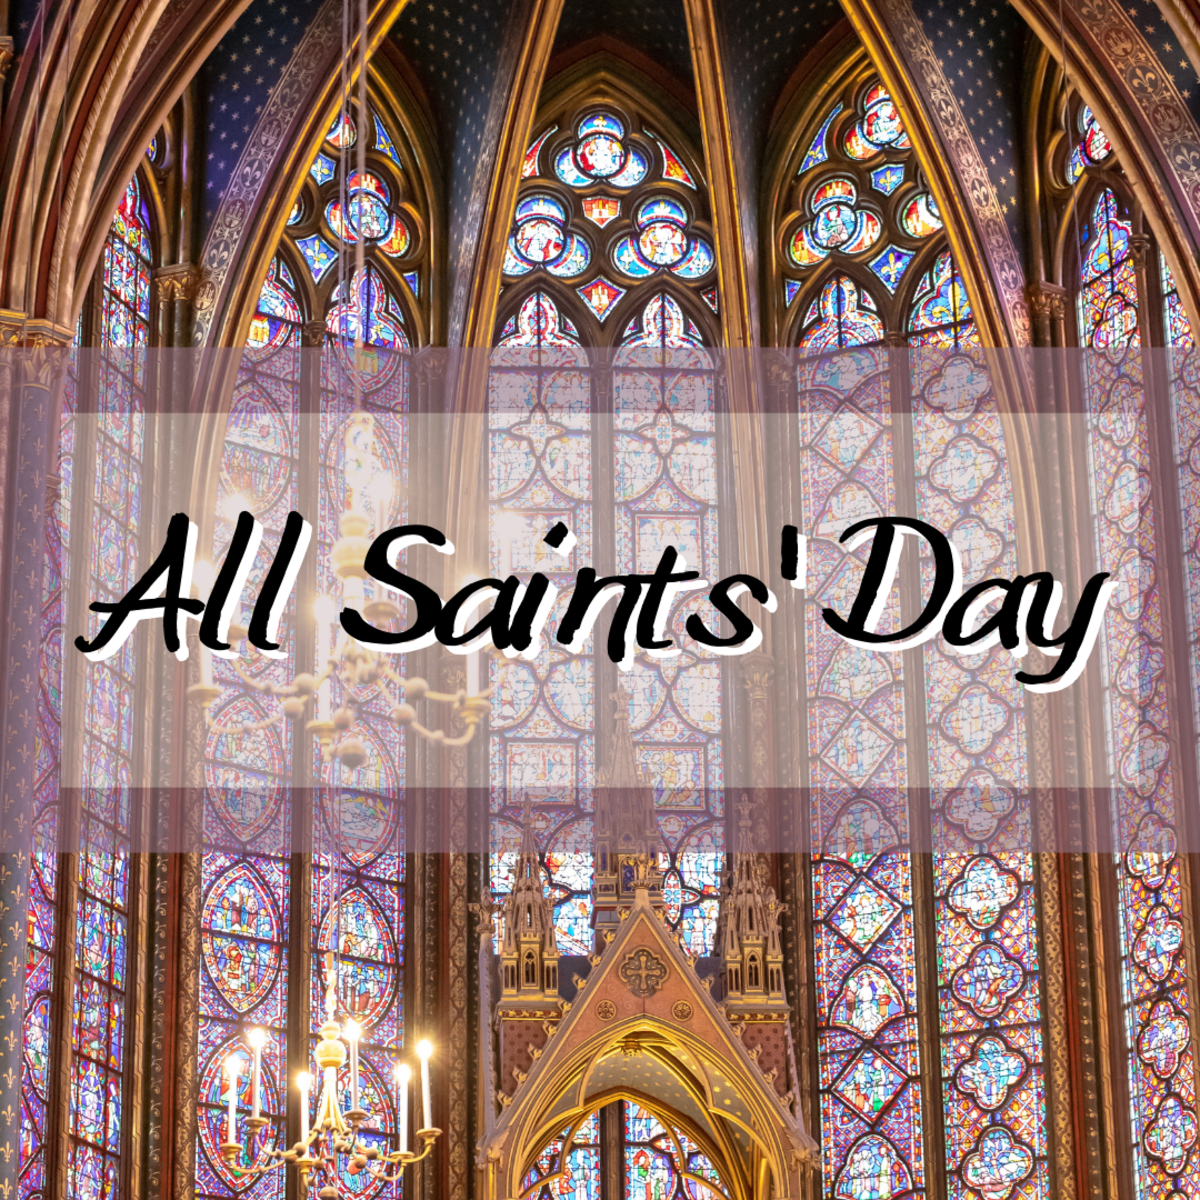 Read on to learn about the history of All Saints' Day, as well as how Catholics, Protestants, and other Christians observe the holiday.